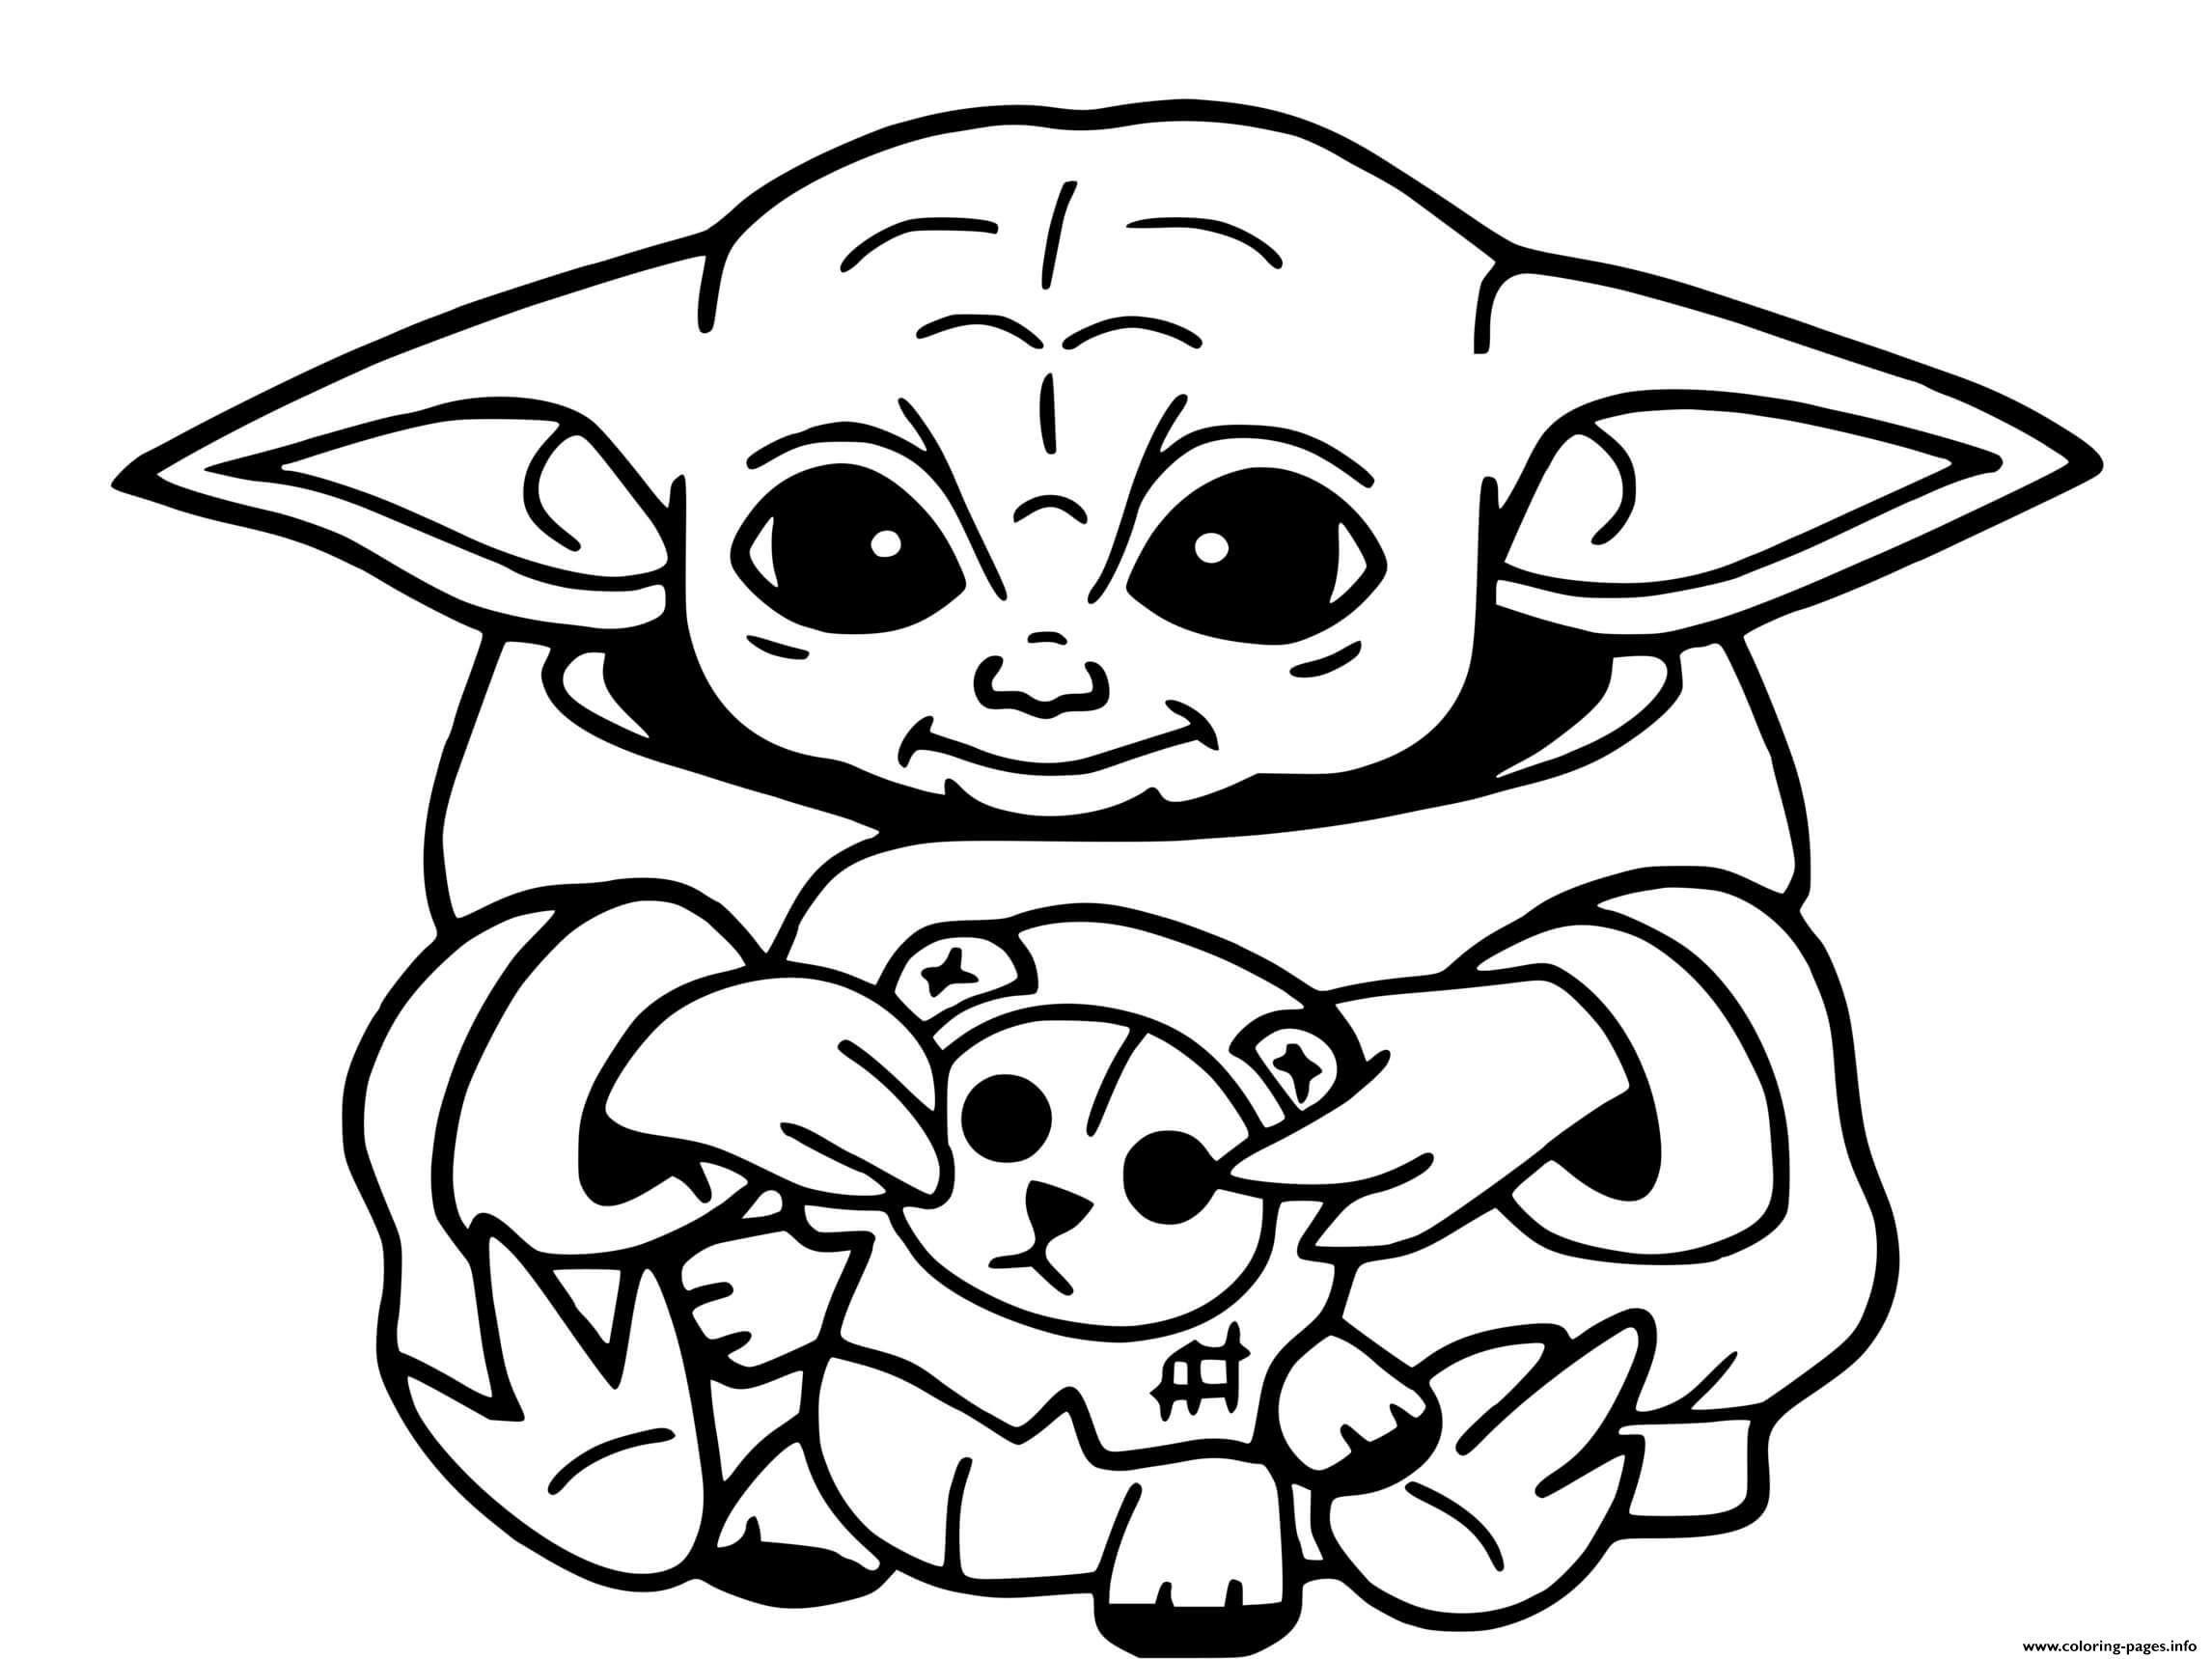 Baby Yoda Mandalorian Jedi Temple coloring pages